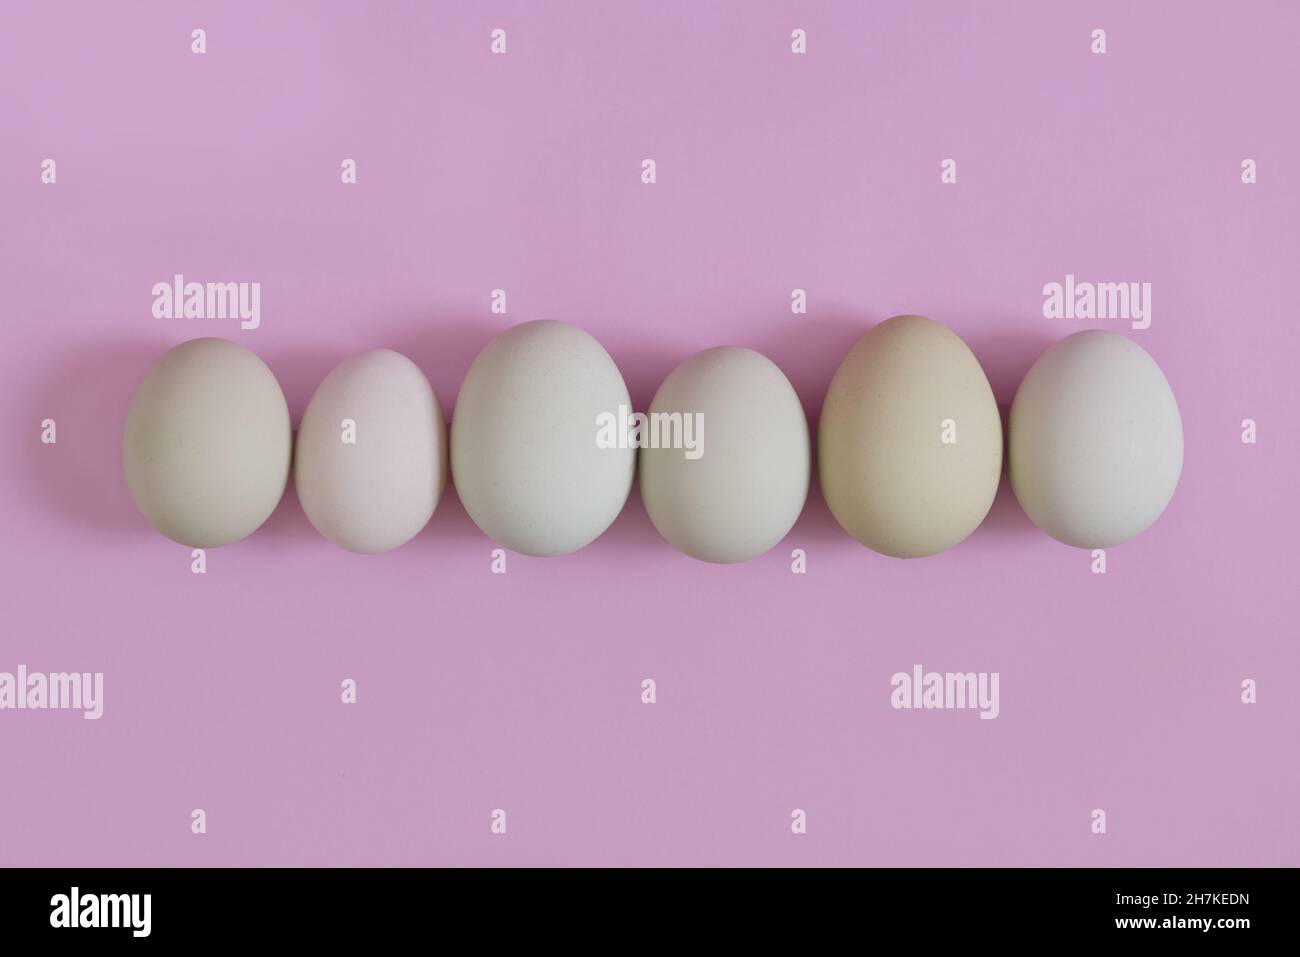 Eggs in a row similars but at the same time differents. Concept of equality Stock Photo